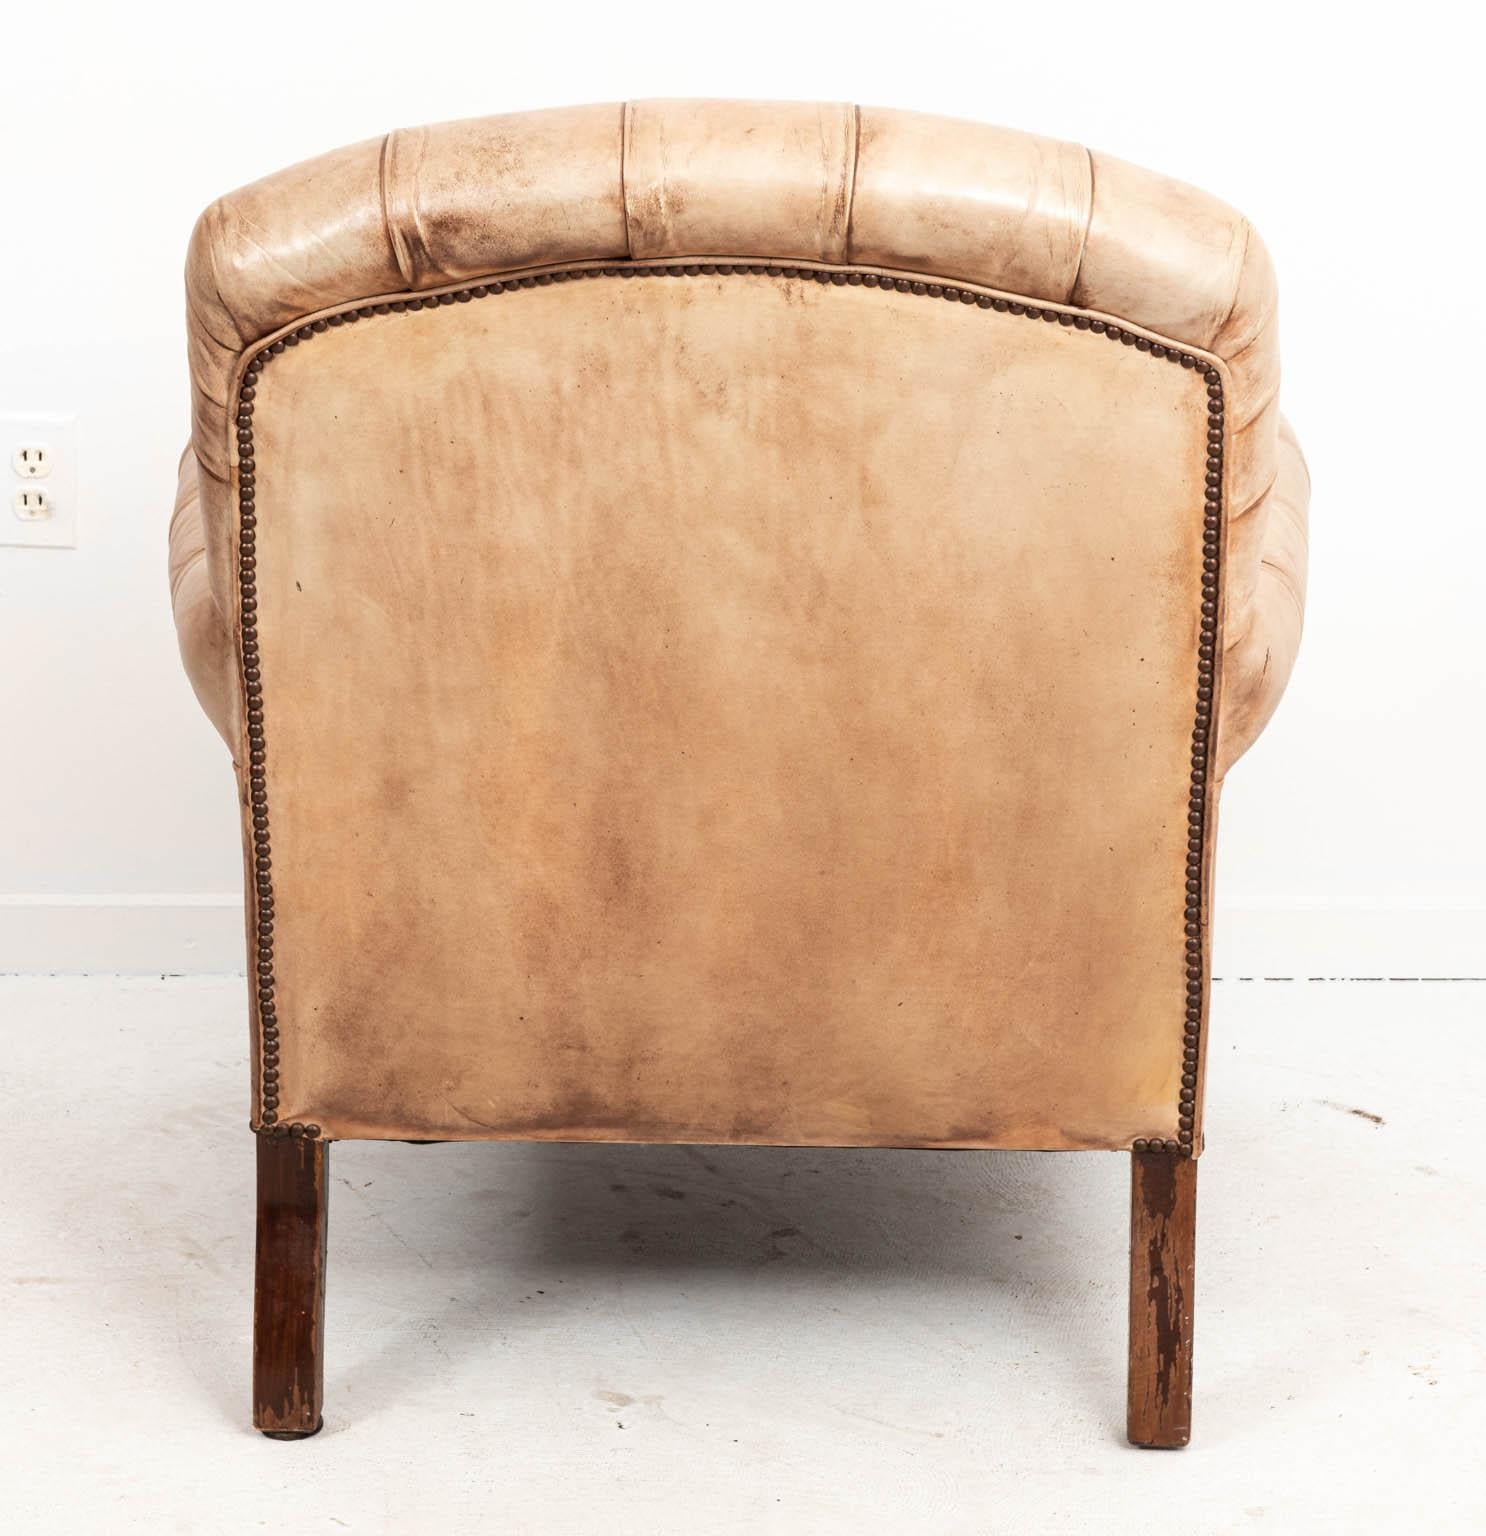 Vintage leather tufted chair with nailhead trim and exposed ring turned legs, circa 1920s. Please note of wear consistent with age including discoloration and minor finish loss to the leather. There is also evidence of chips and scratches on the